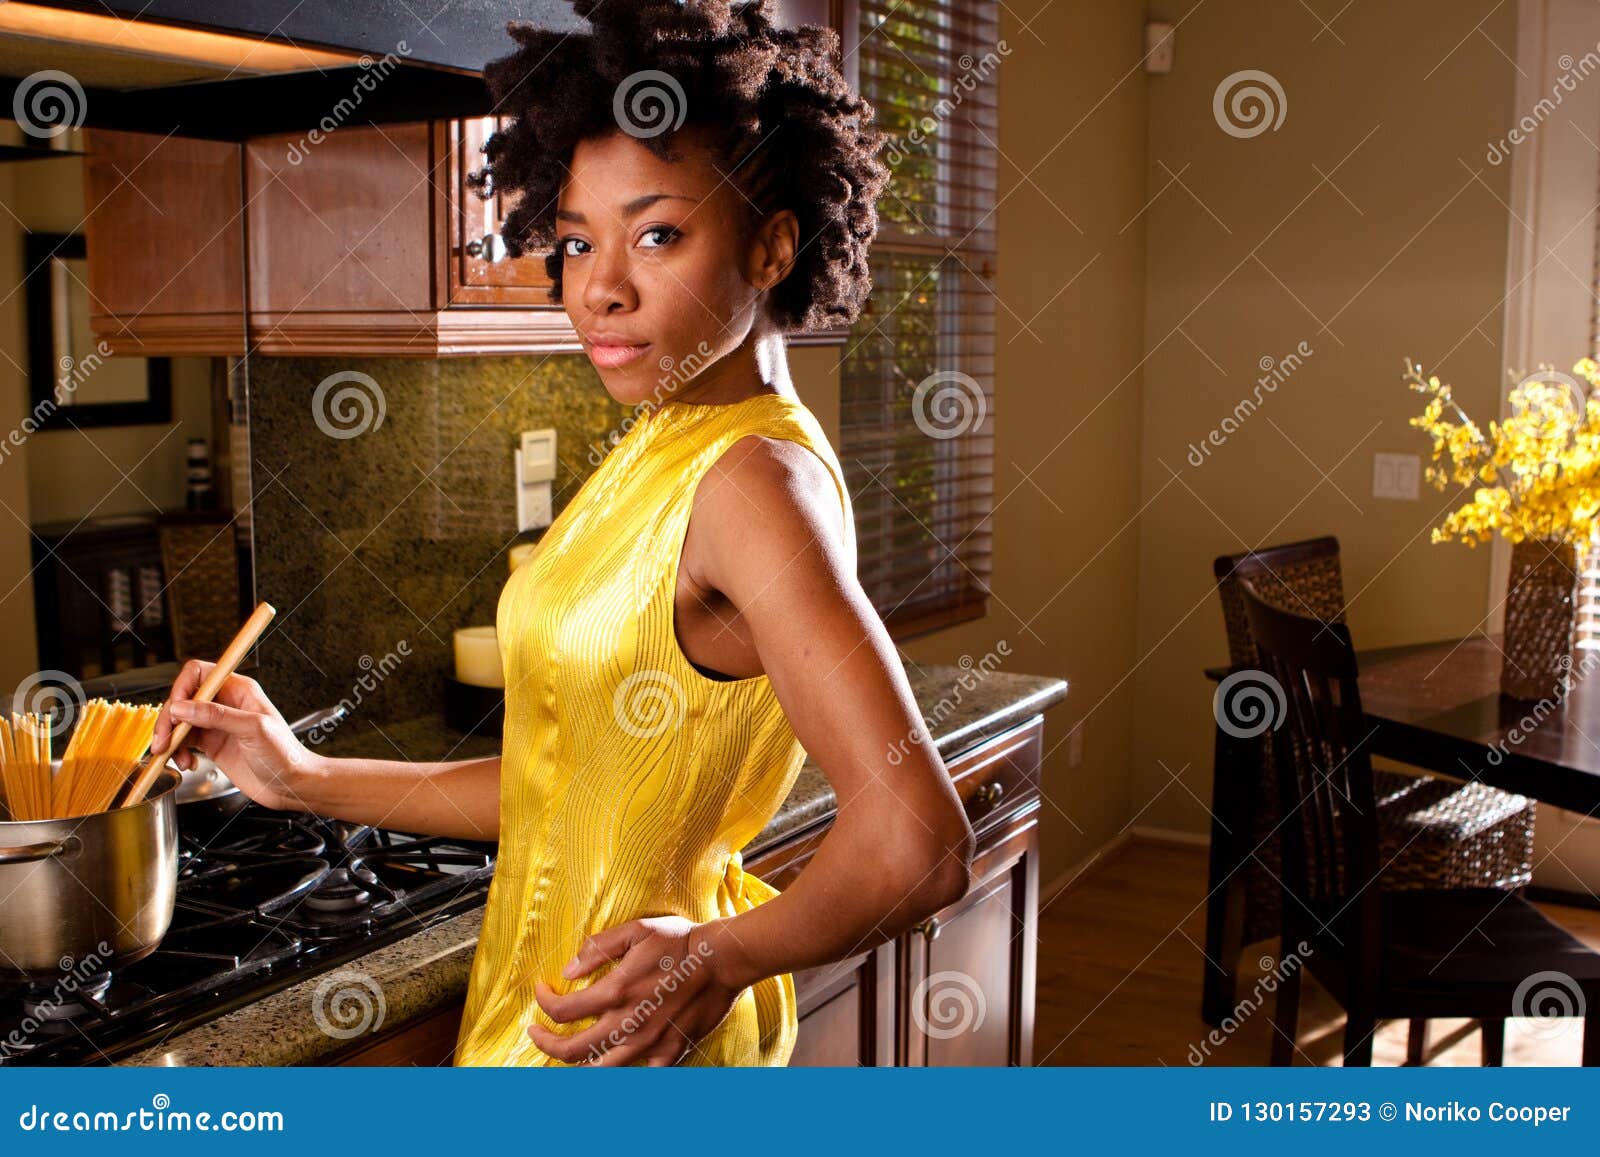 https://thumbs.dreamstime.com/z/african-american-woman-cooking-kitchen-happy-130157293.jpg